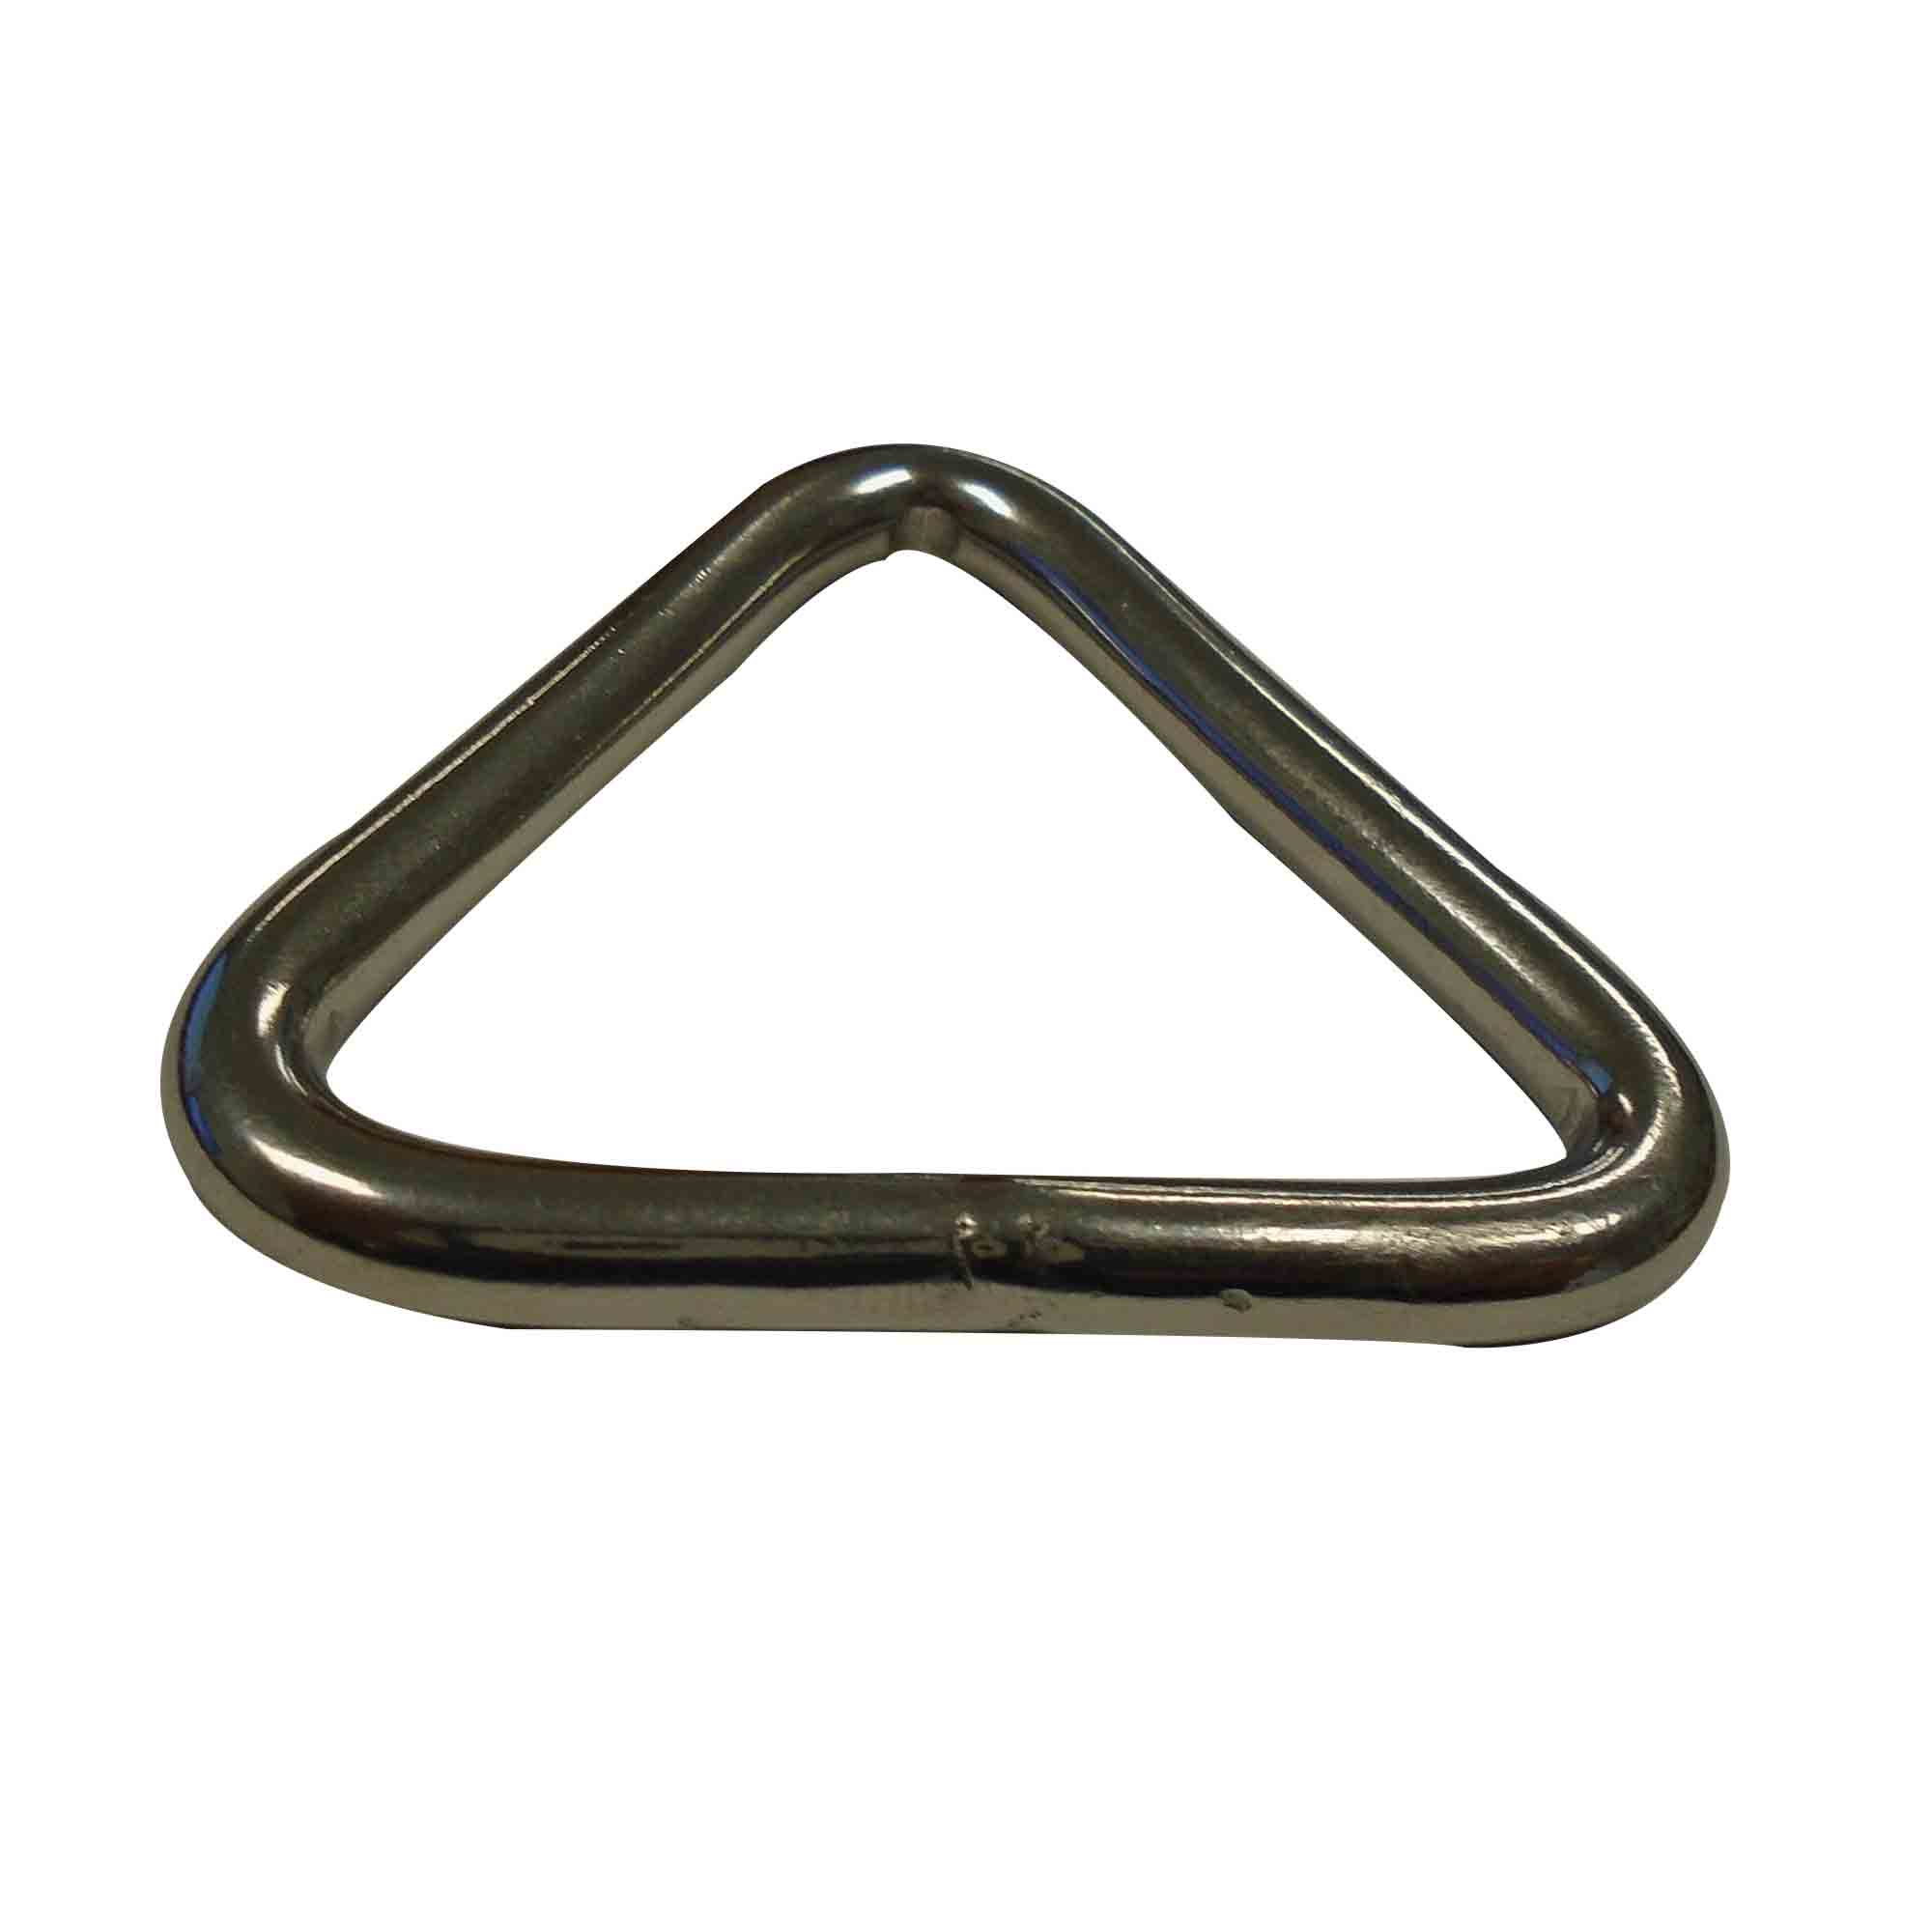 Stainless Steel Triangle, 1/4" x 2", 4-Pack - FO3808-M4